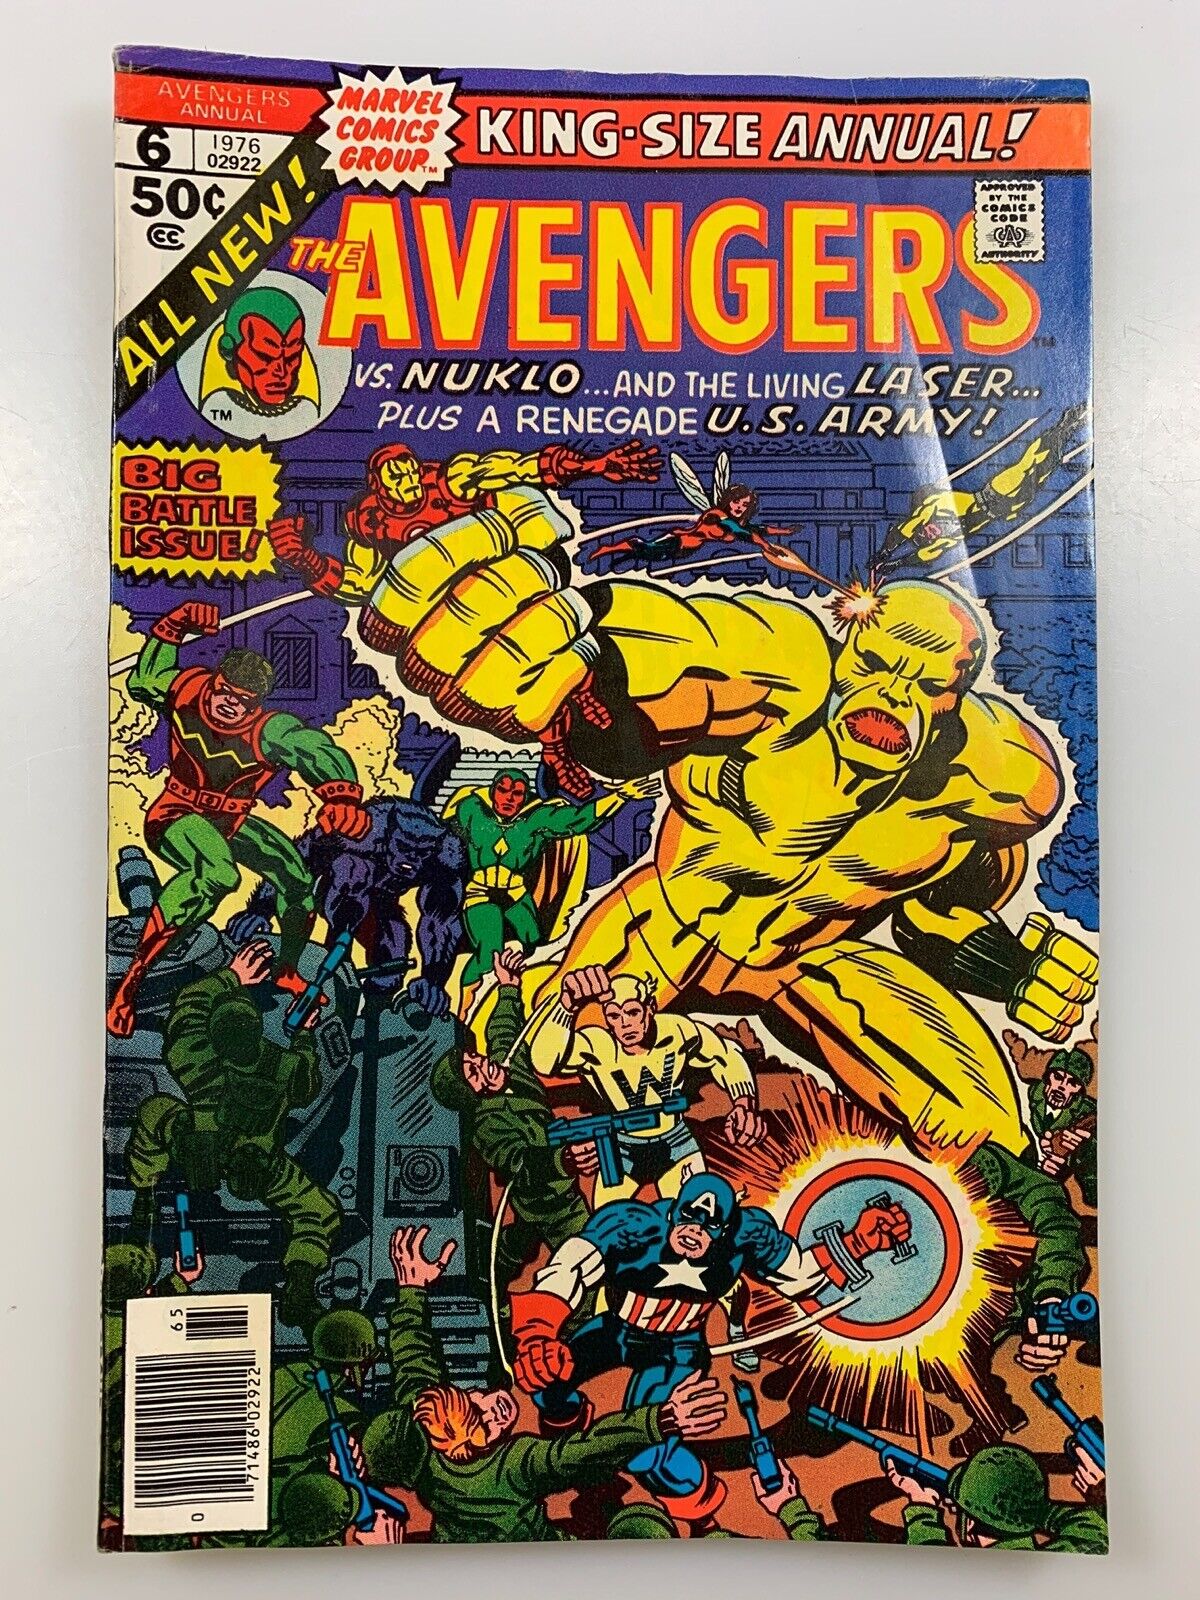 AVENGERS KING-SIZE ANNUAL #6: No Final Victory 1976 NUKLO / LIVING LASER COMICS